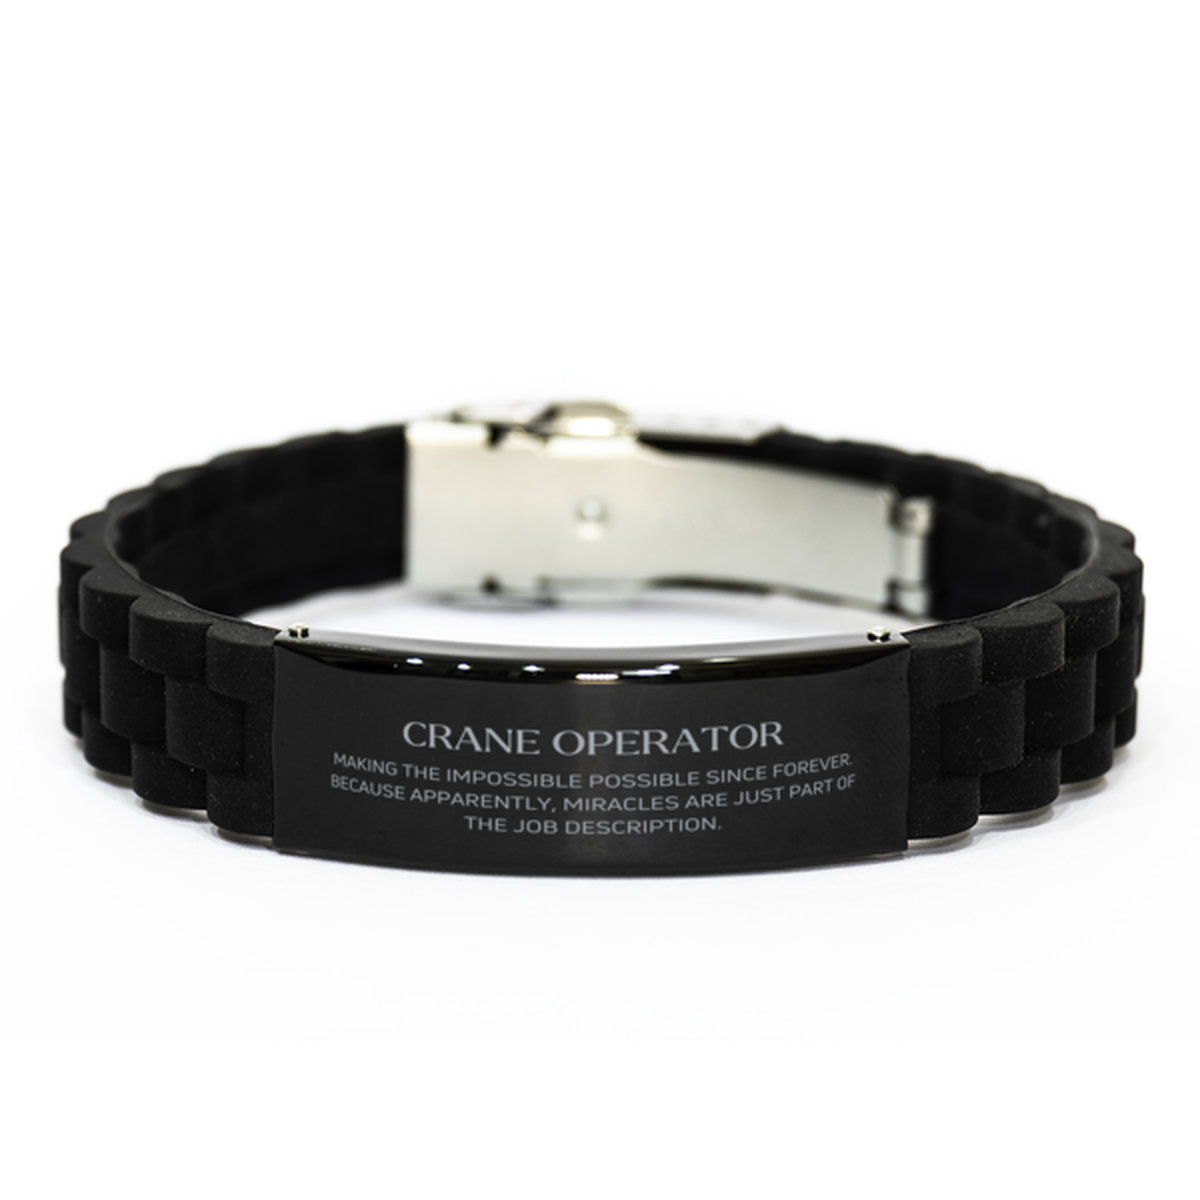 Funny Crane Operator Gifts, Miracles are just part of the job description, Inspirational Birthday Black Glidelock Clasp Bracelet For Crane Operator, Men, Women, Coworkers, Friends, Boss